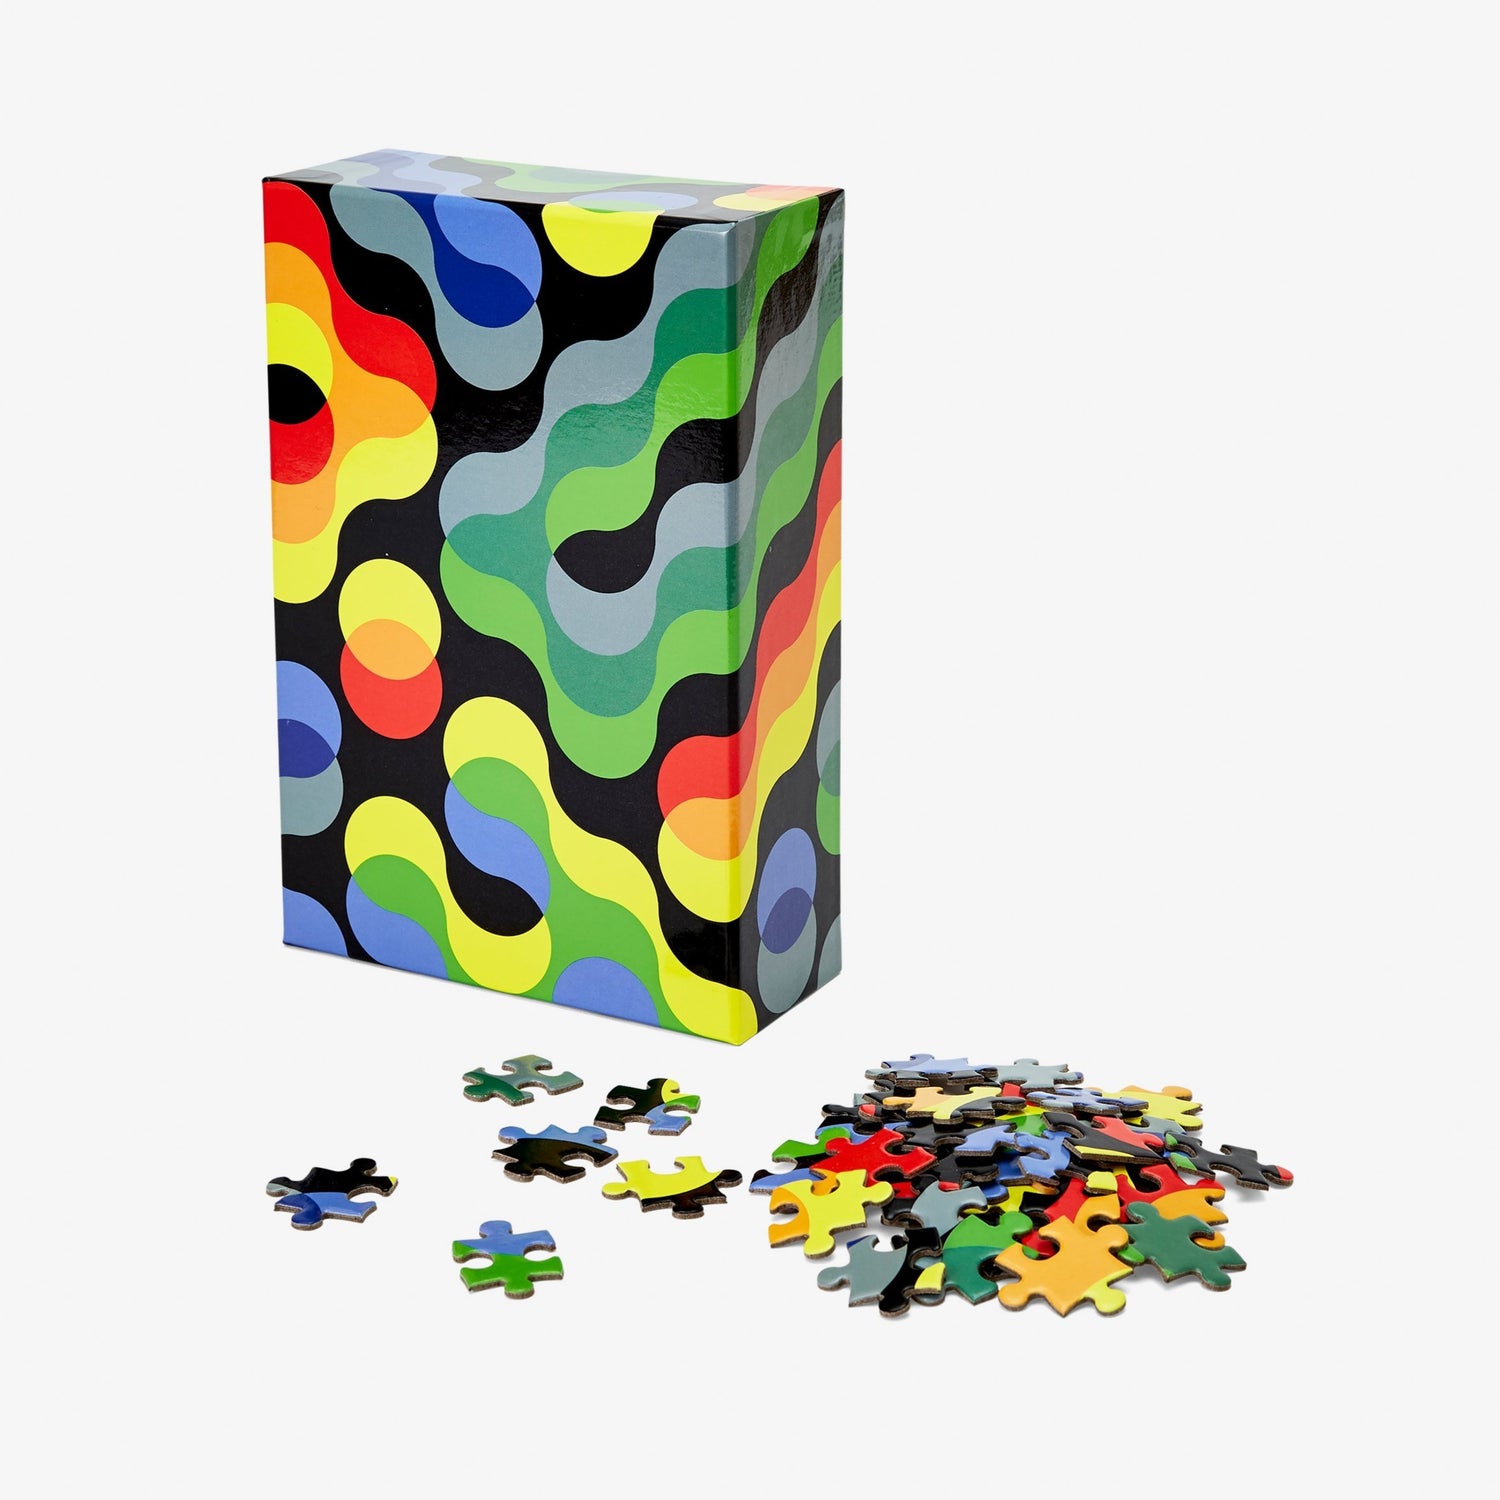 Areawear Pattern Puzzle, Arc. Available at Easy Tiger Goods Toronto.